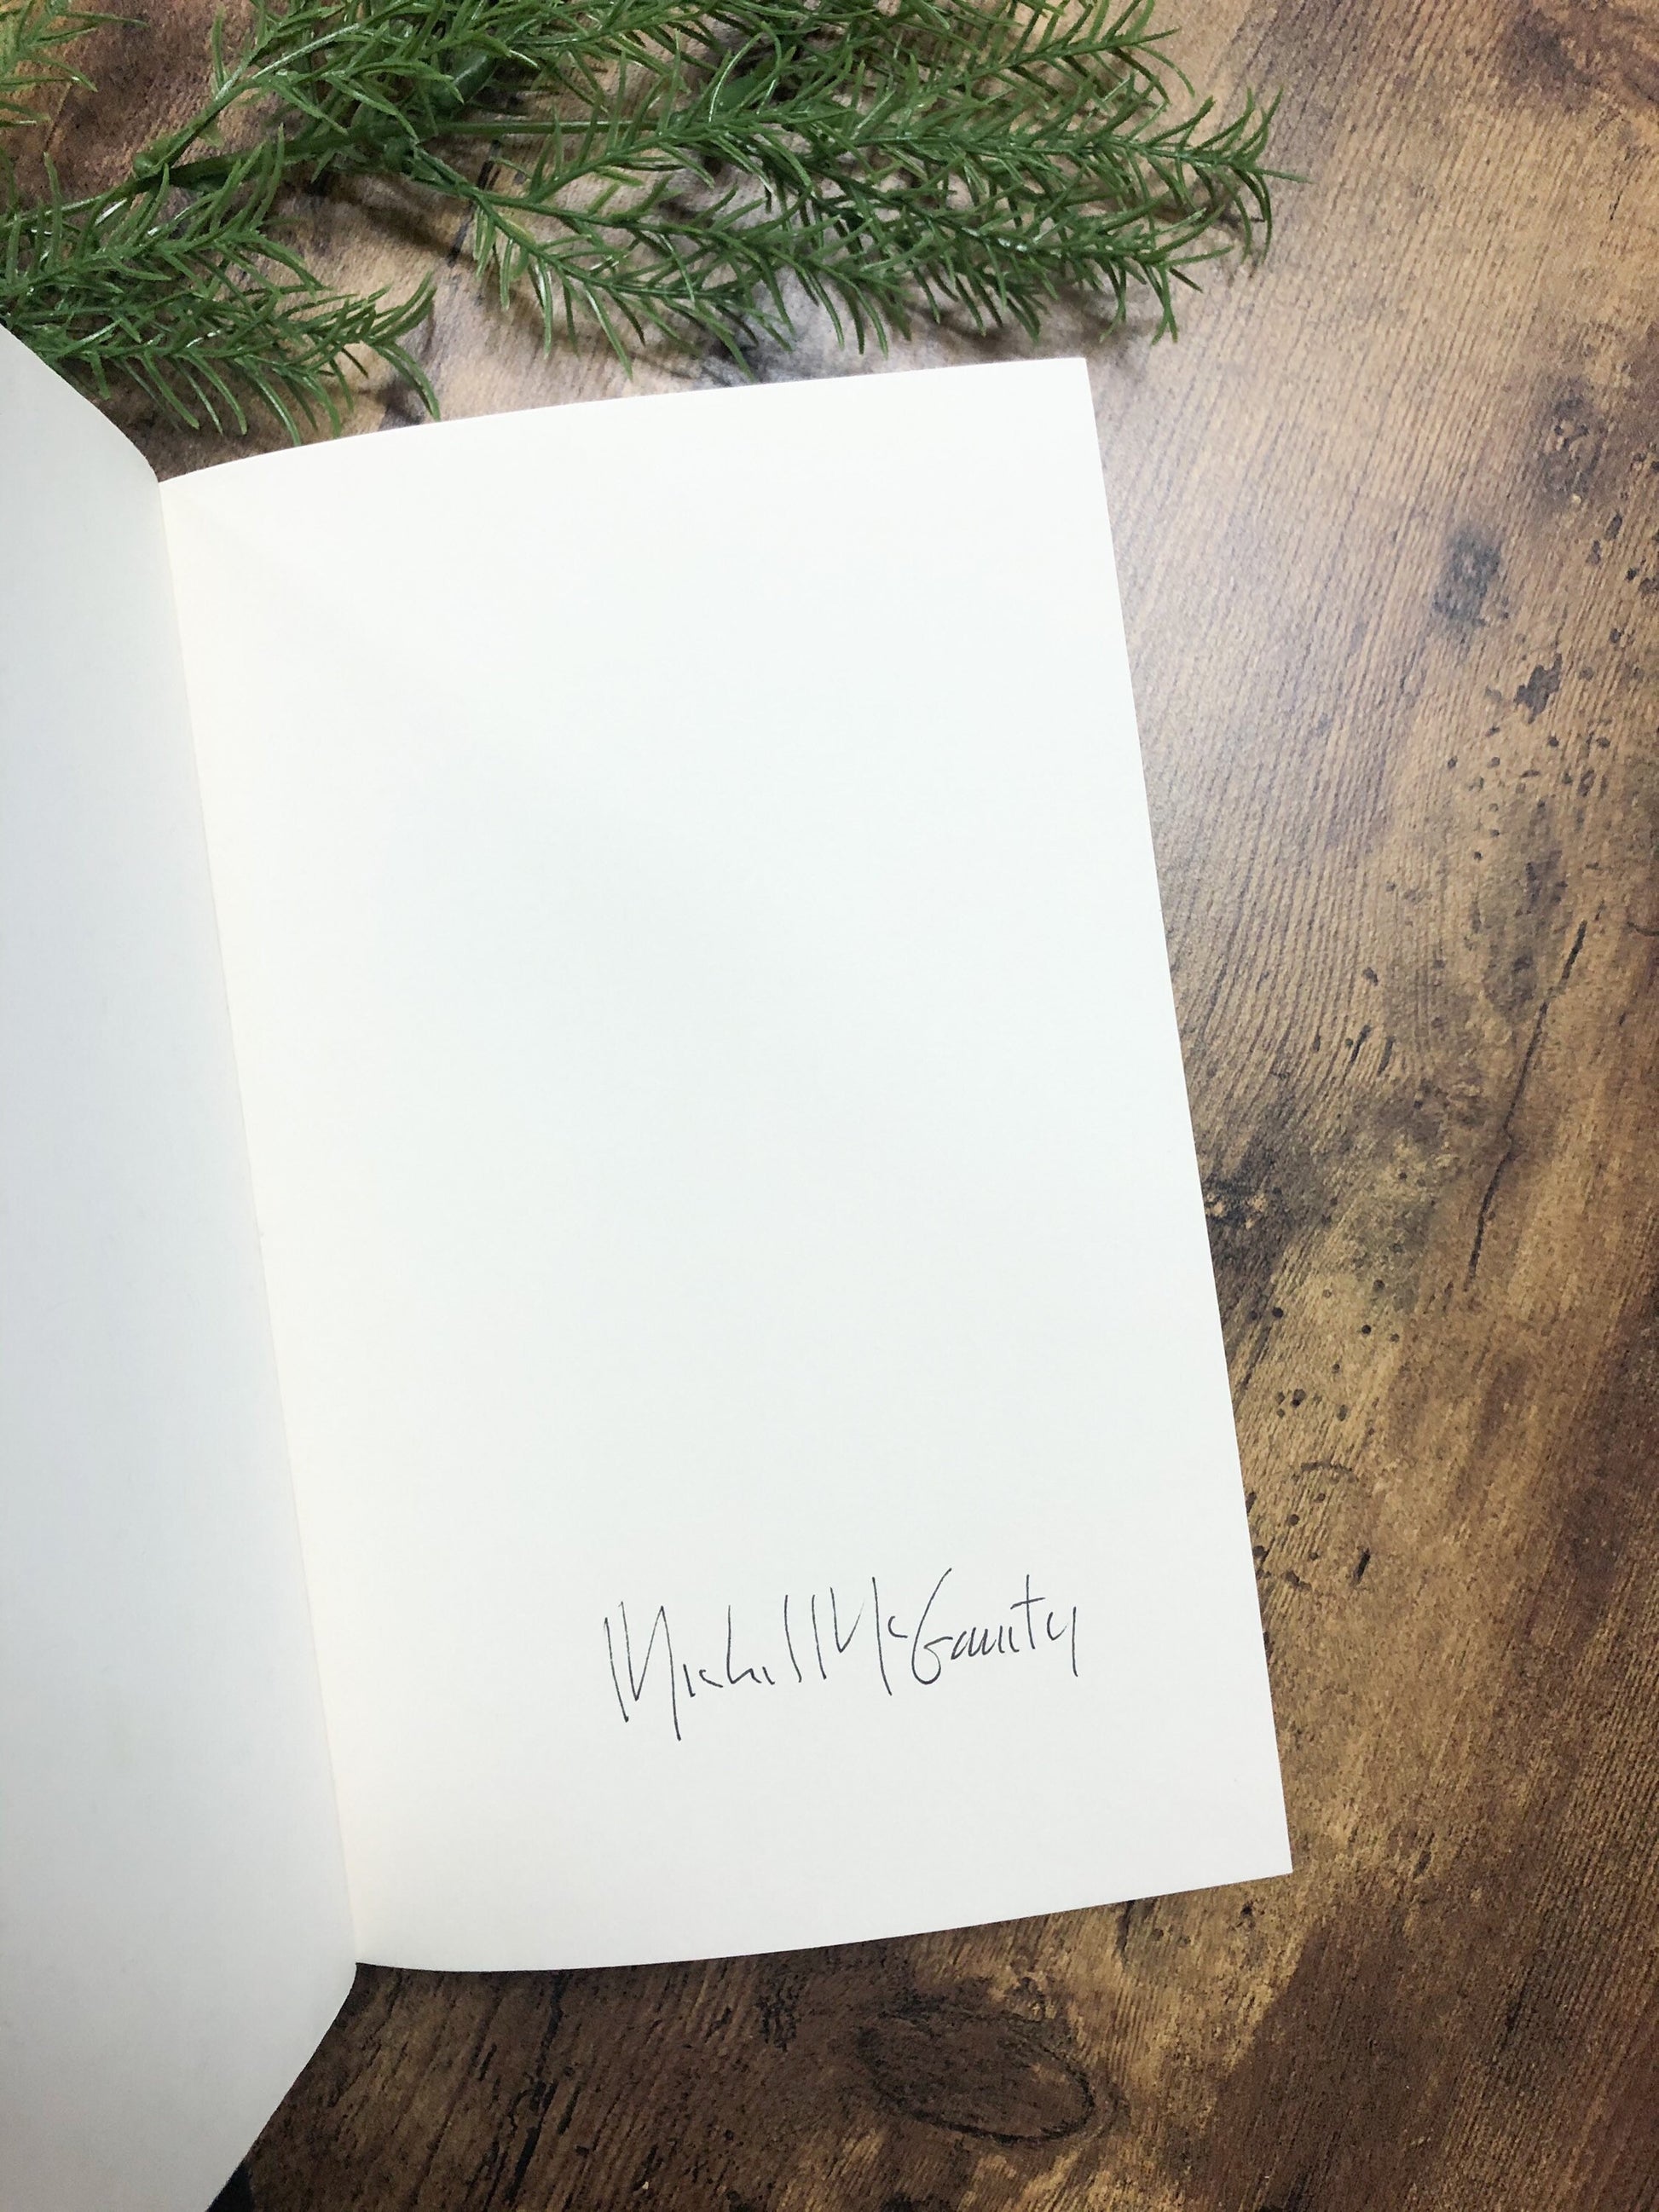 Signed First Edition by Michael McGarrity / Slow Kill